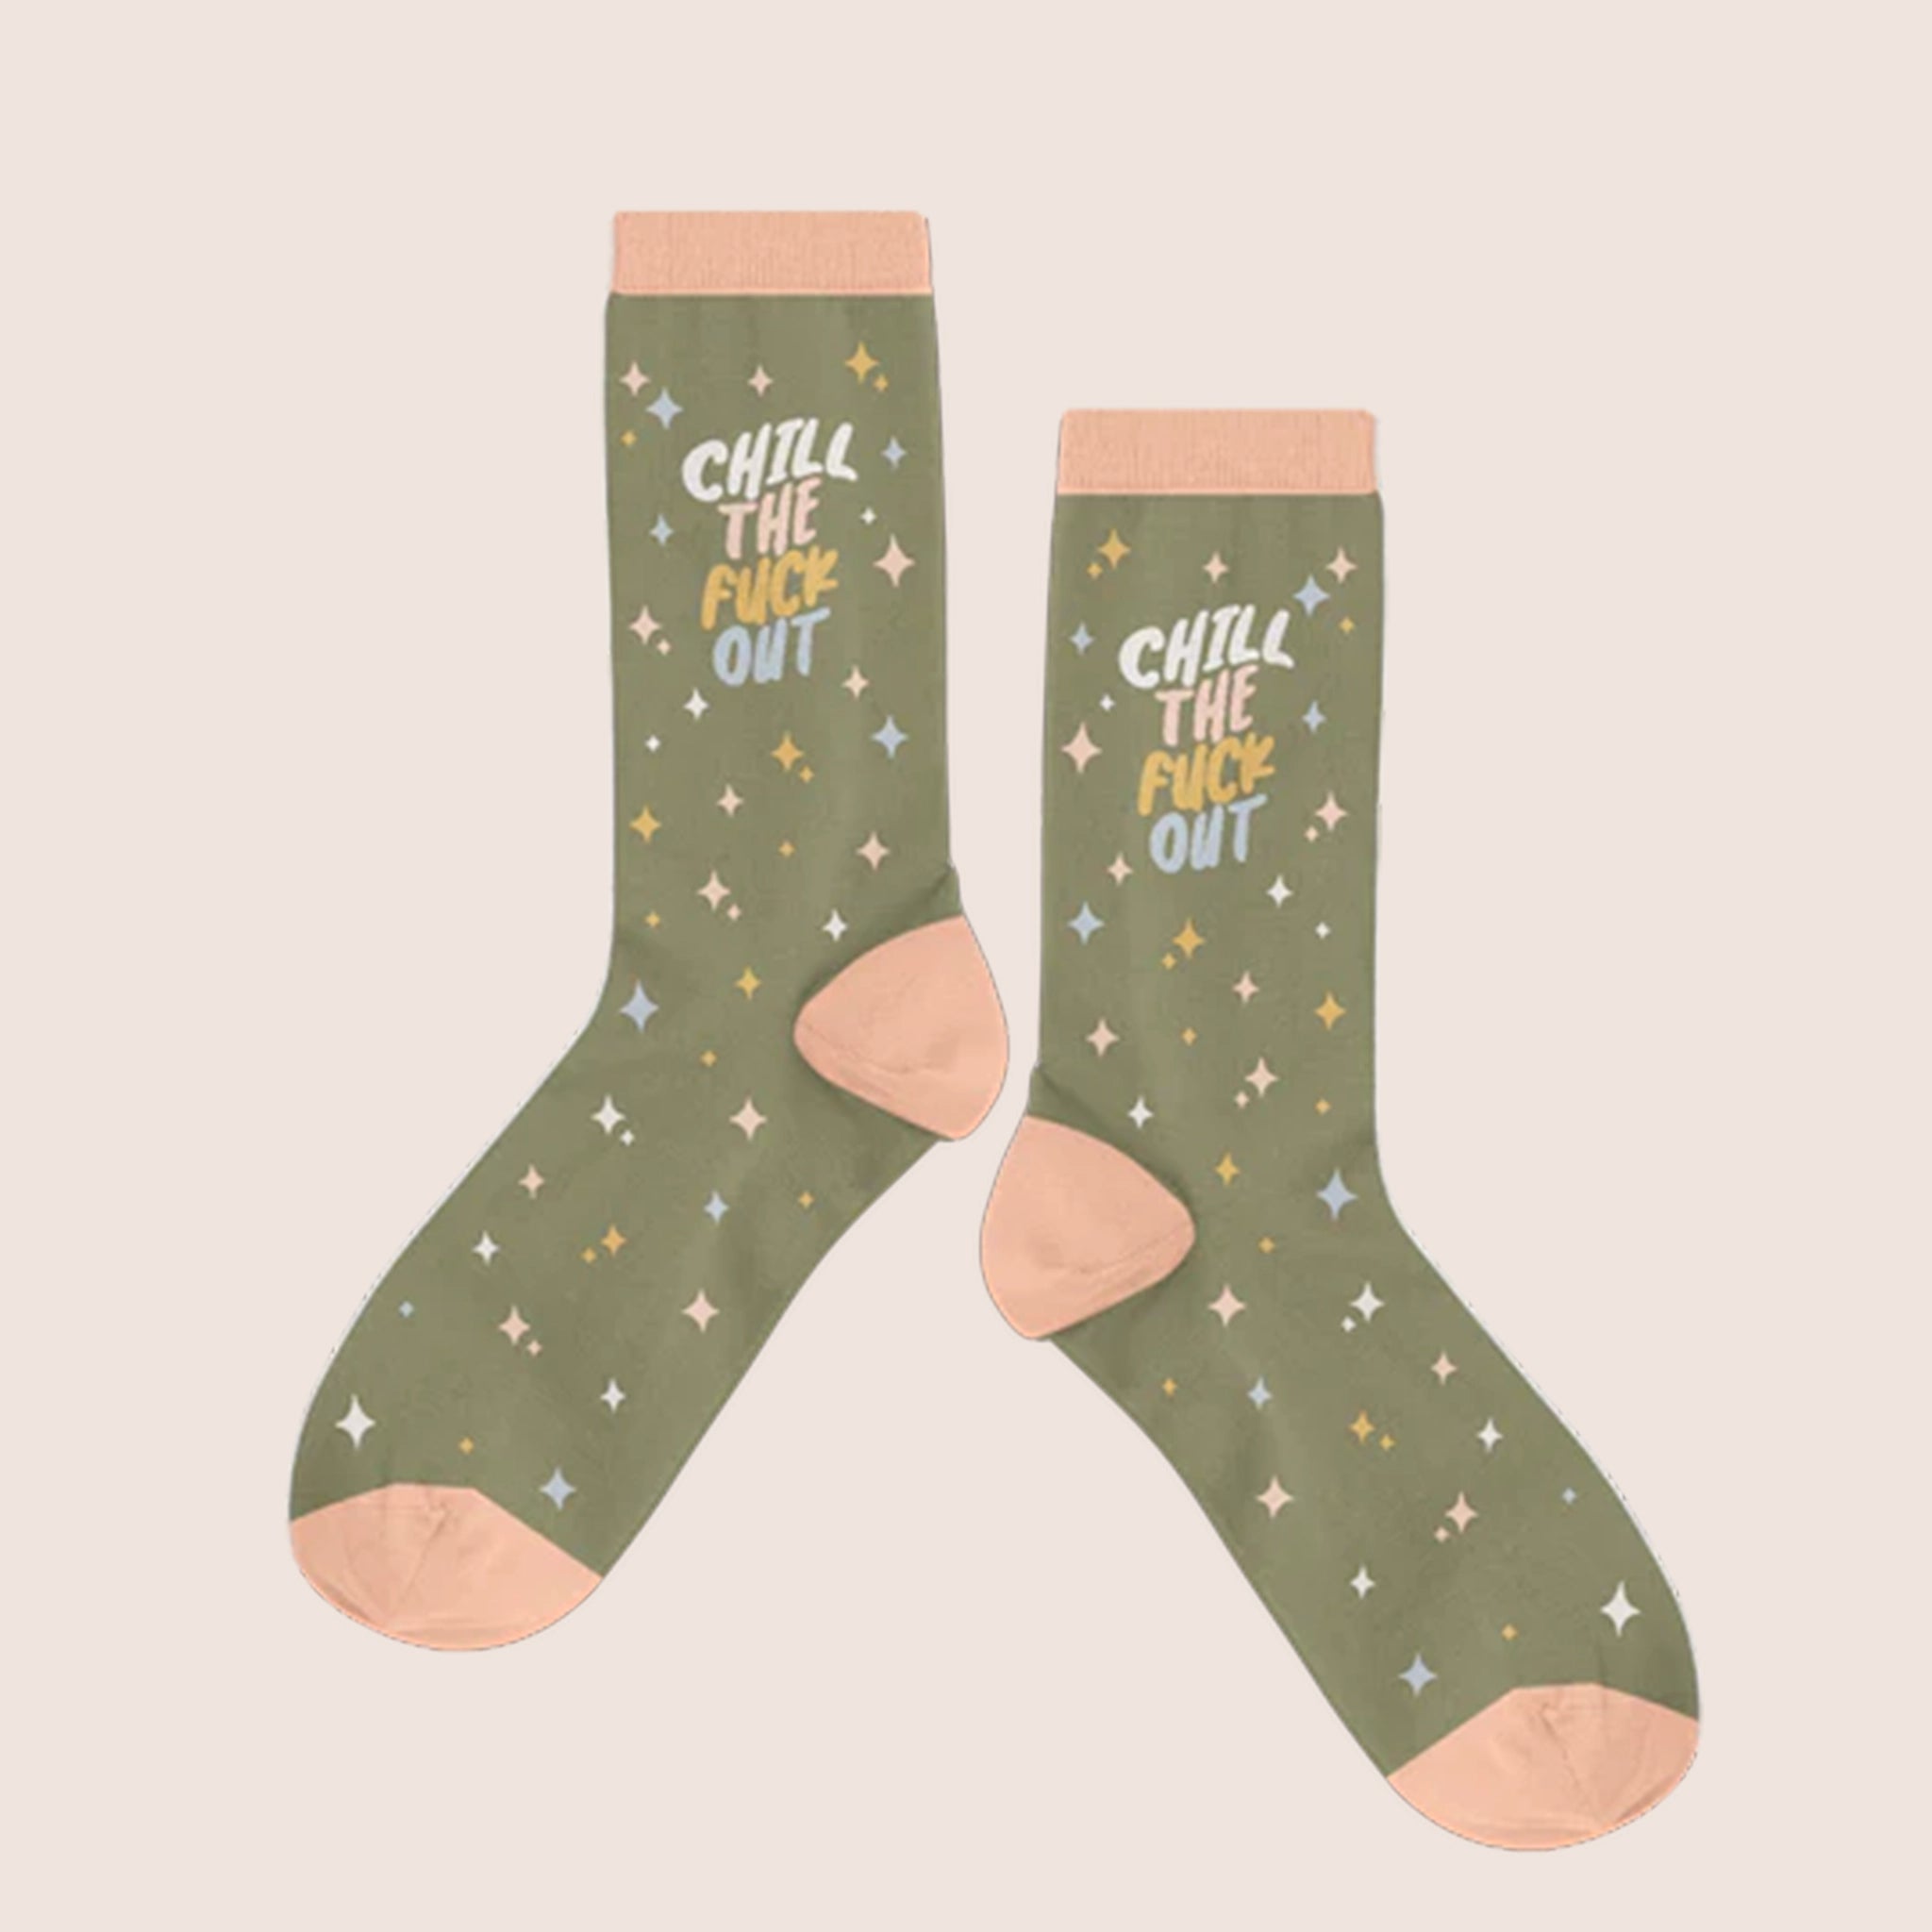 A pair of olive green crew socks with a peach border at the top and on the feet and heel as well as a diamond design all over in shades of cream, light yellow and light blue as well as text that reads, "Chill The Fuck Out" in the same color ways.